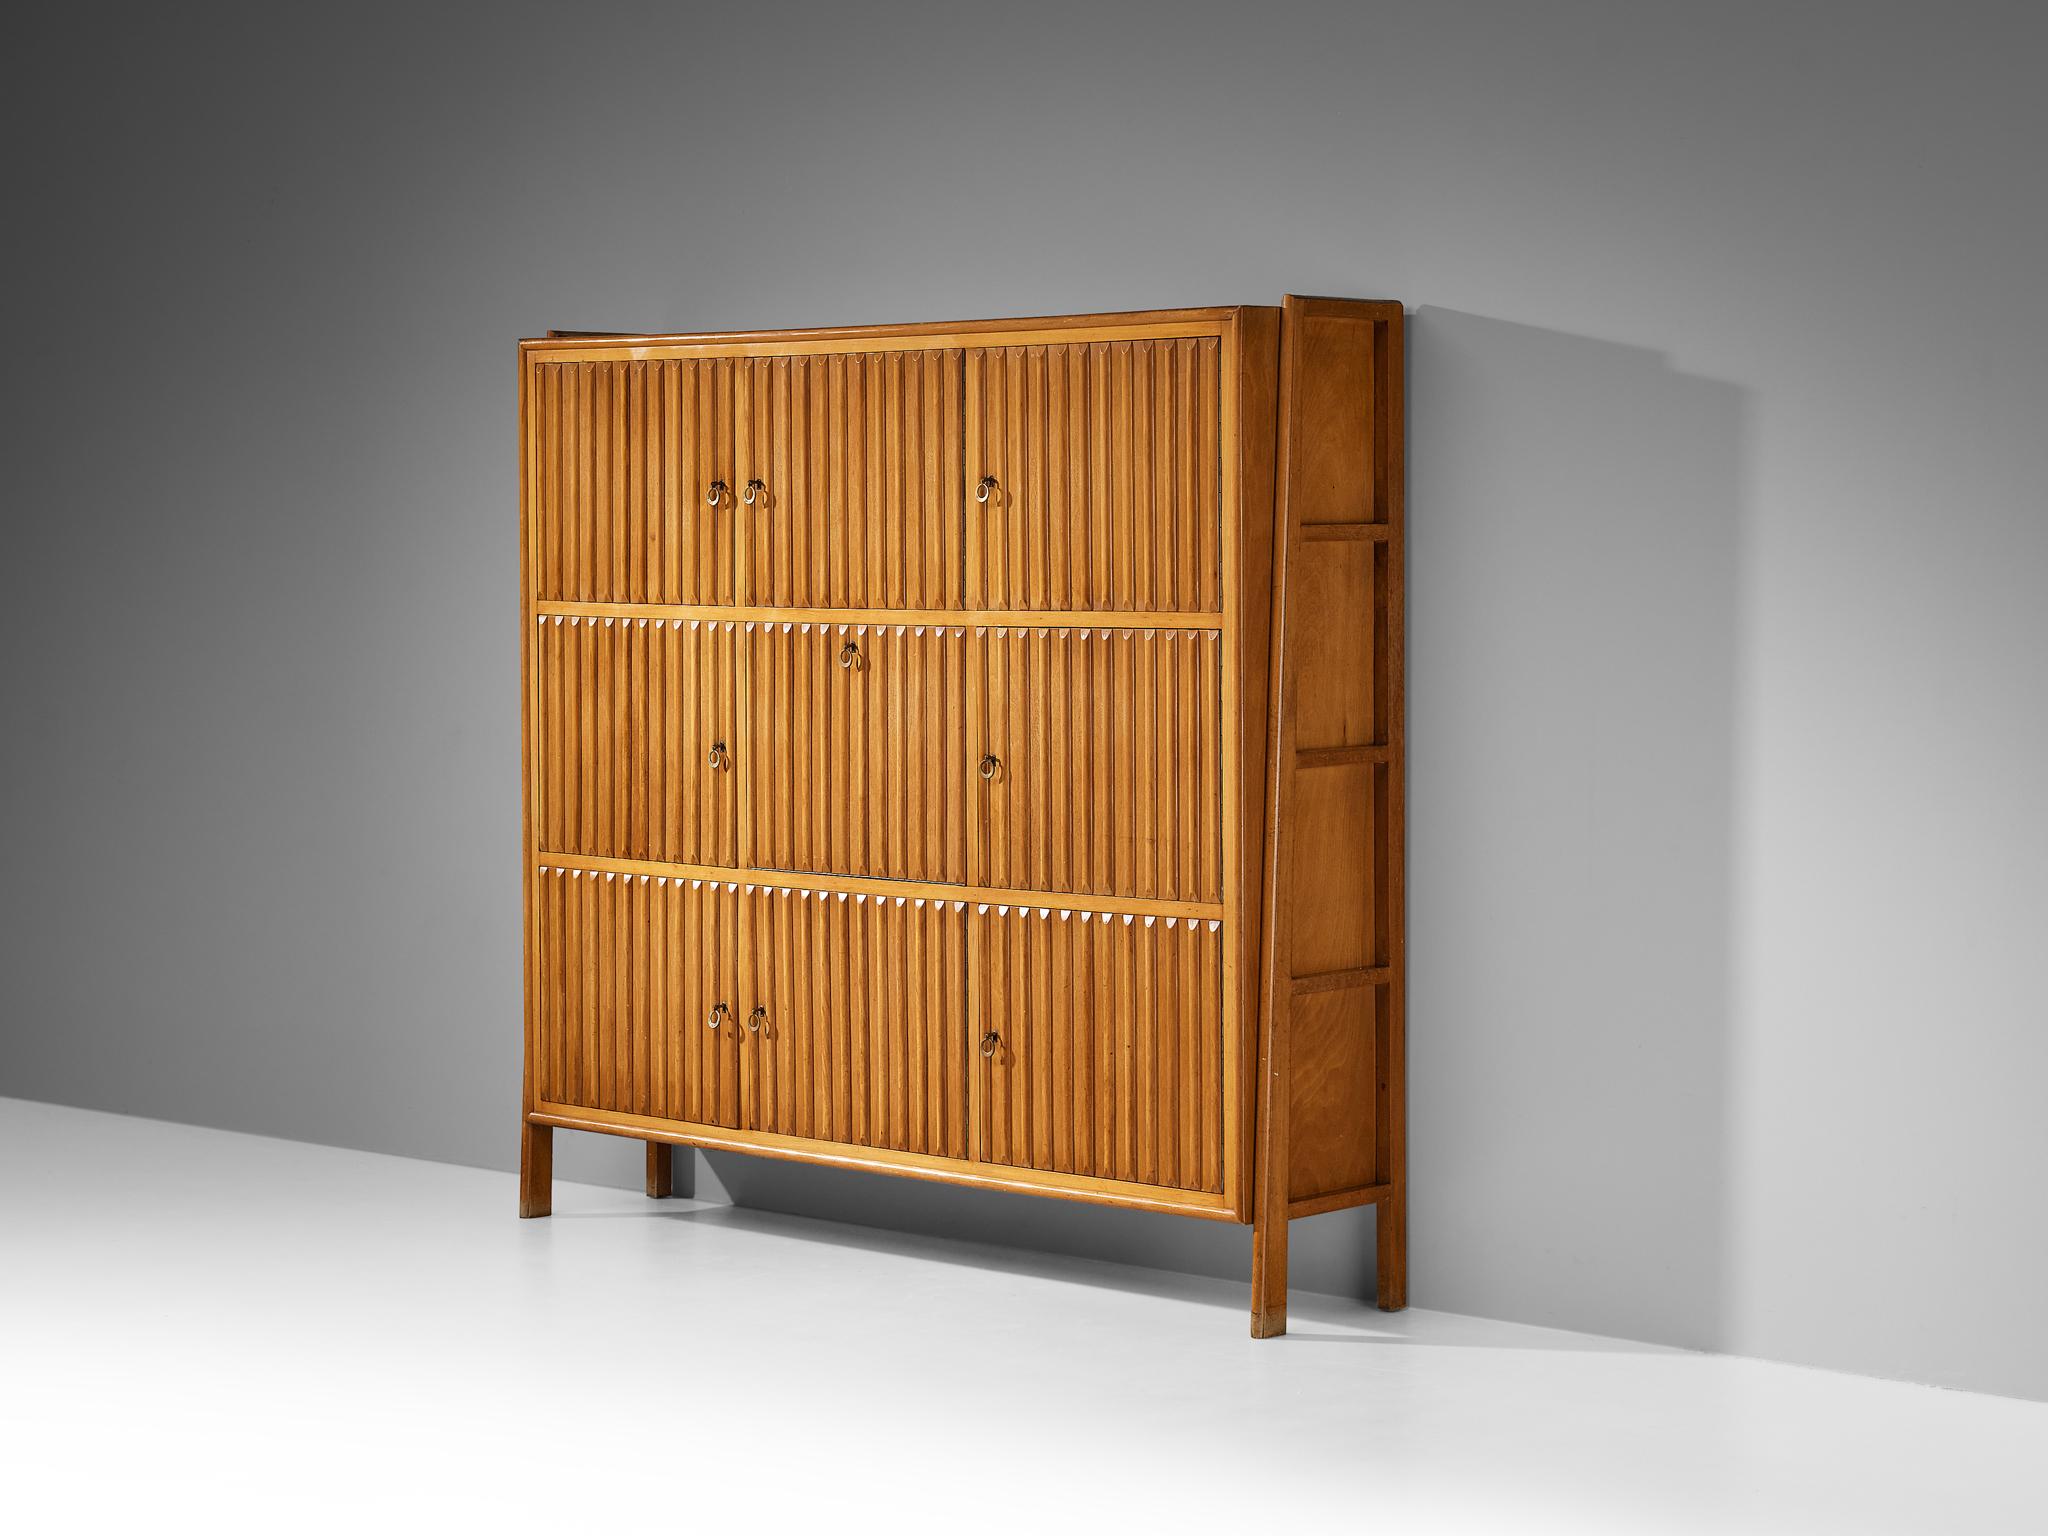 C.M. Varos for Casa Moderna, sideboard, stained beech, glass, brass, Italy, 1959

This unique mid-century bookcase is designed by C.M. Varos for Casa Moderna and crafted in 1959. The defining features of this piece are the intricately carved